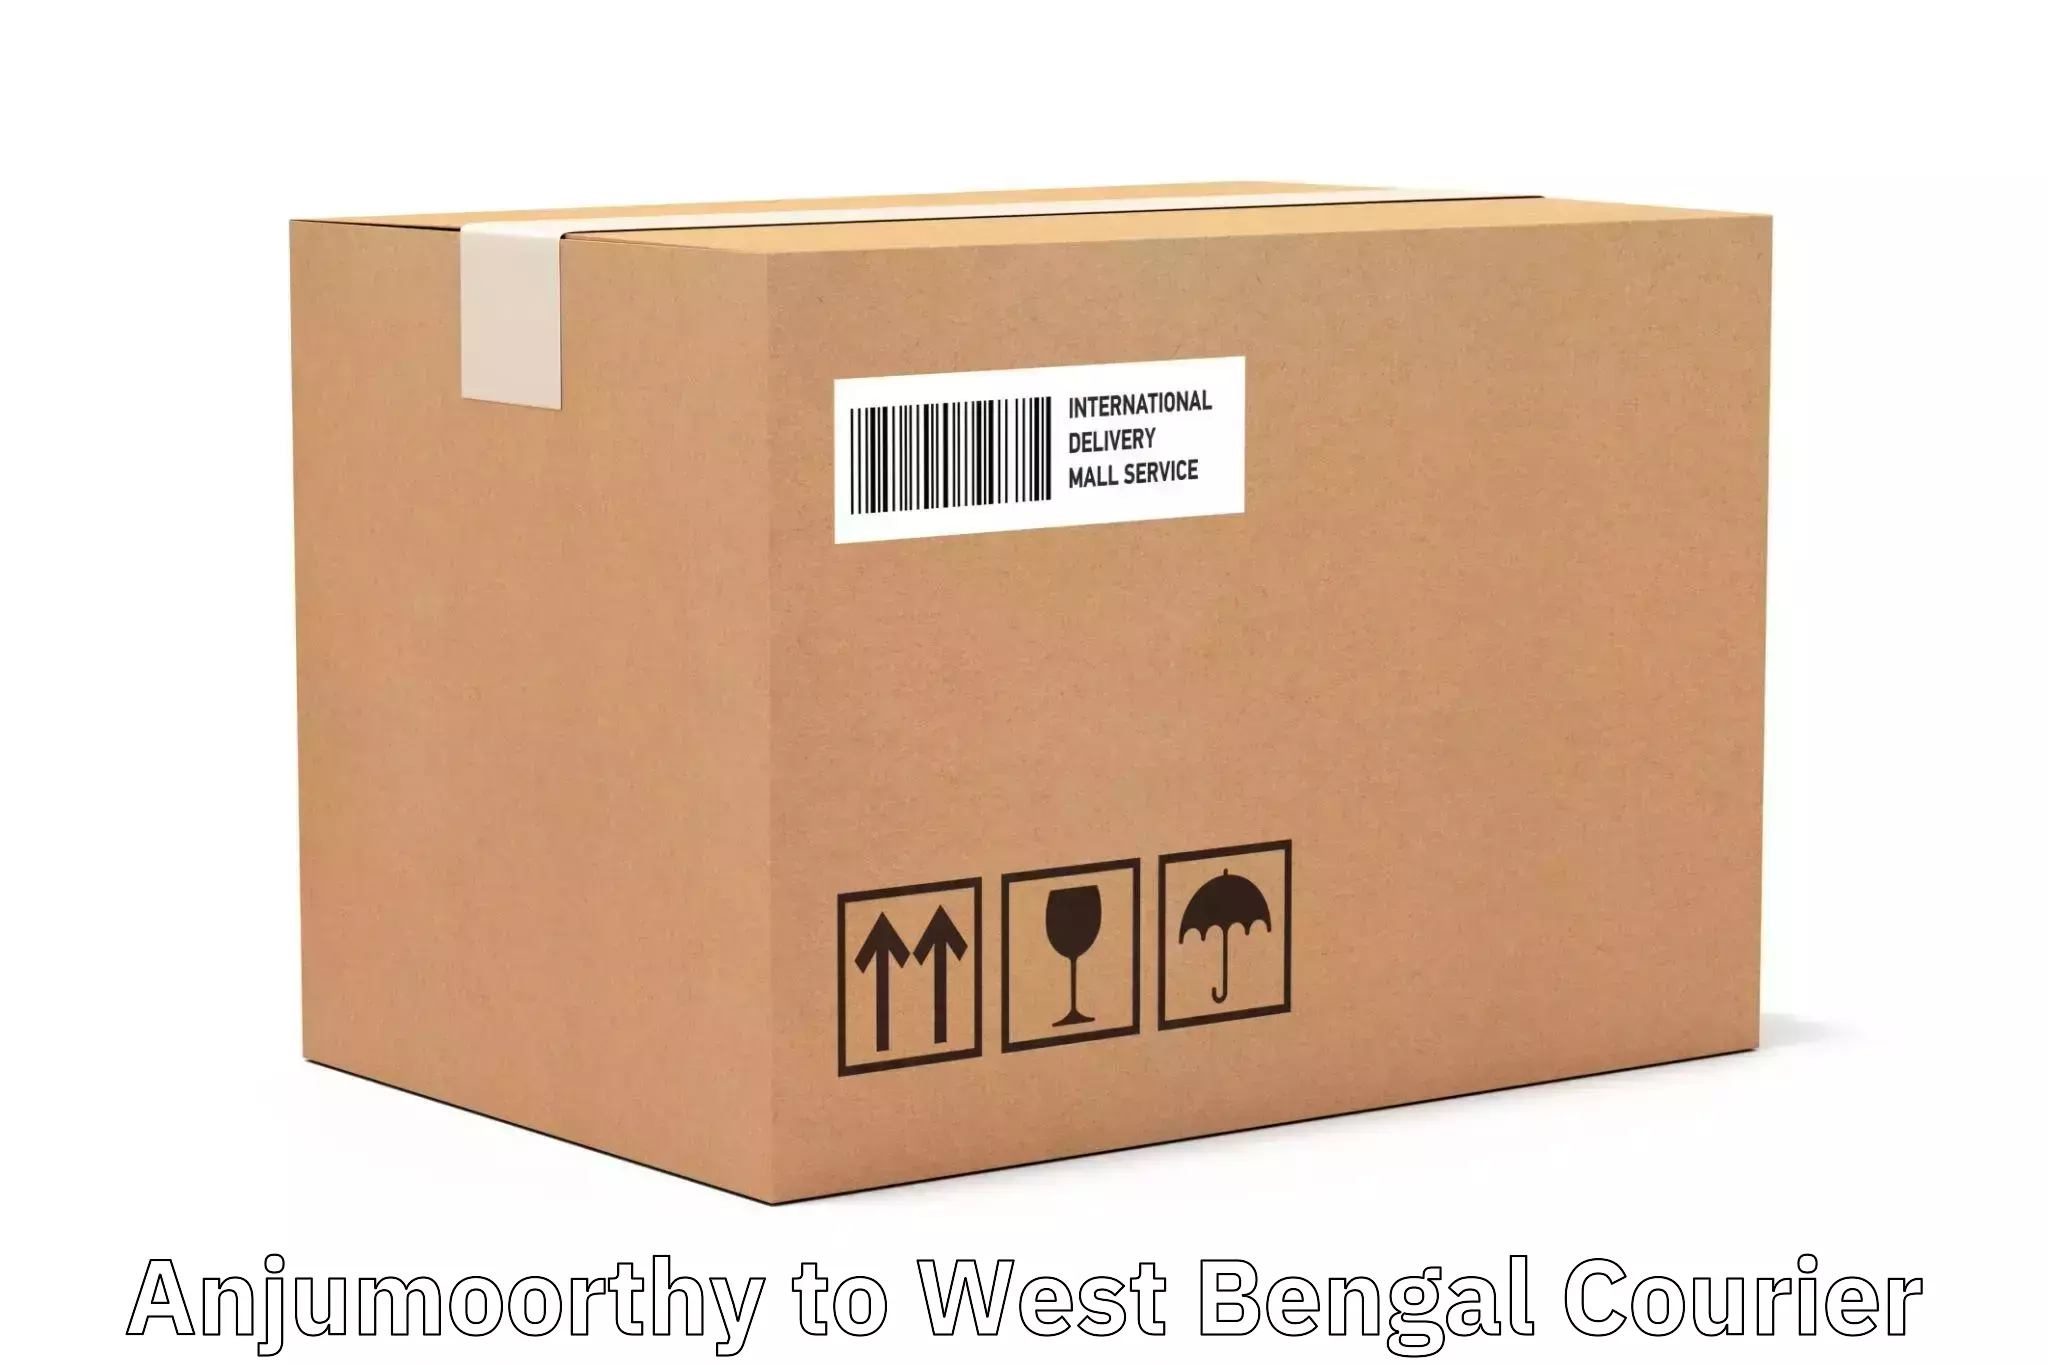 Postal and courier services Anjumoorthy to Howrah